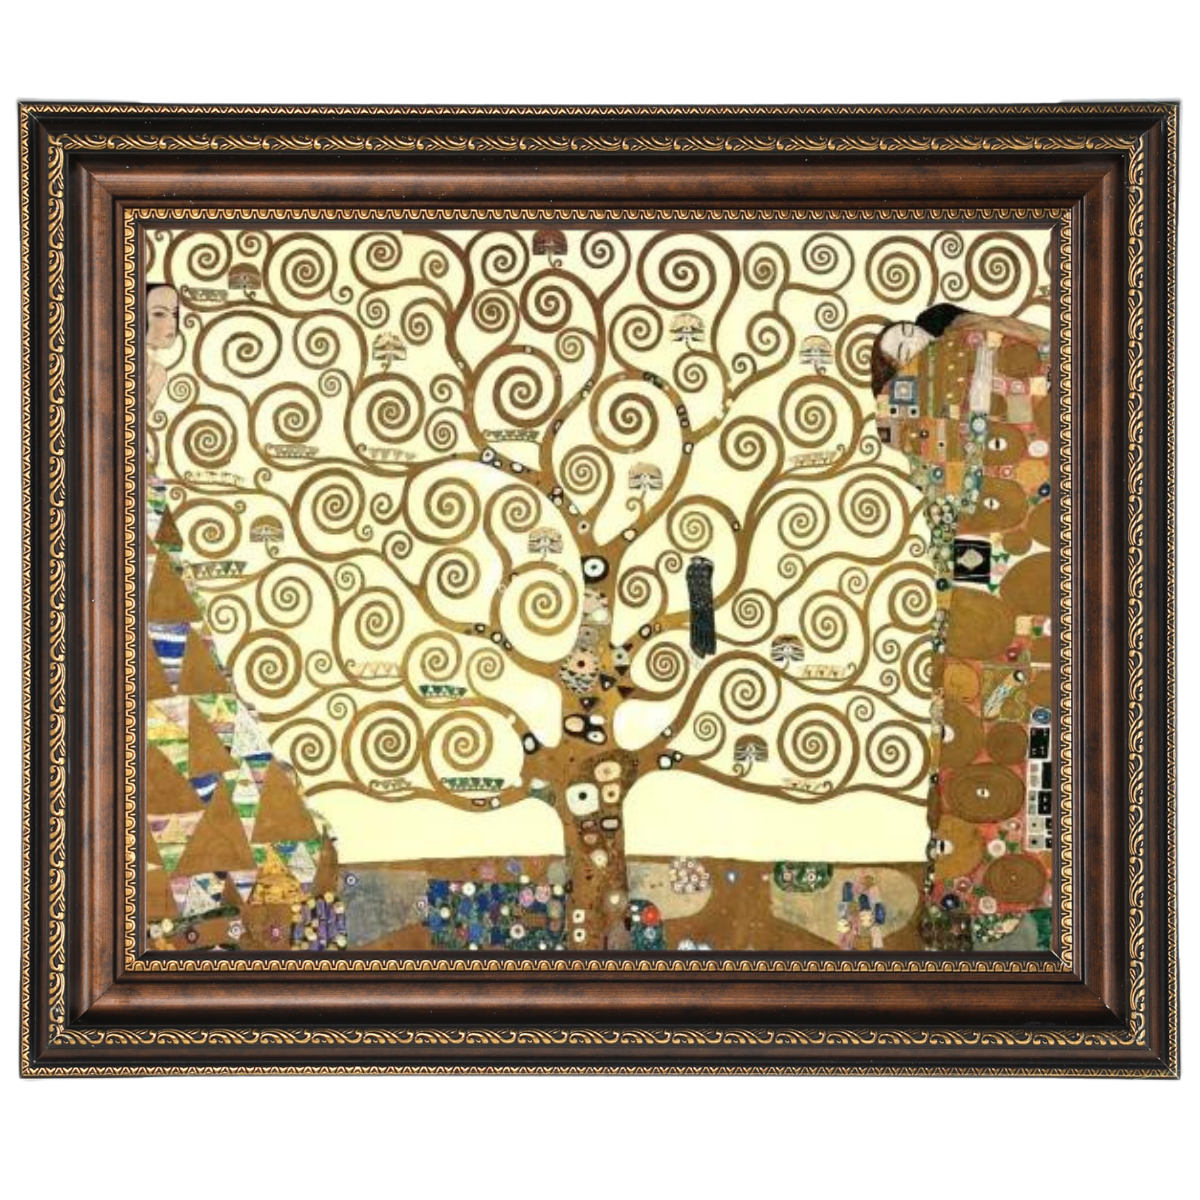 The Tree of Life - Abstracts Wall Art Prints Decor For Living Room